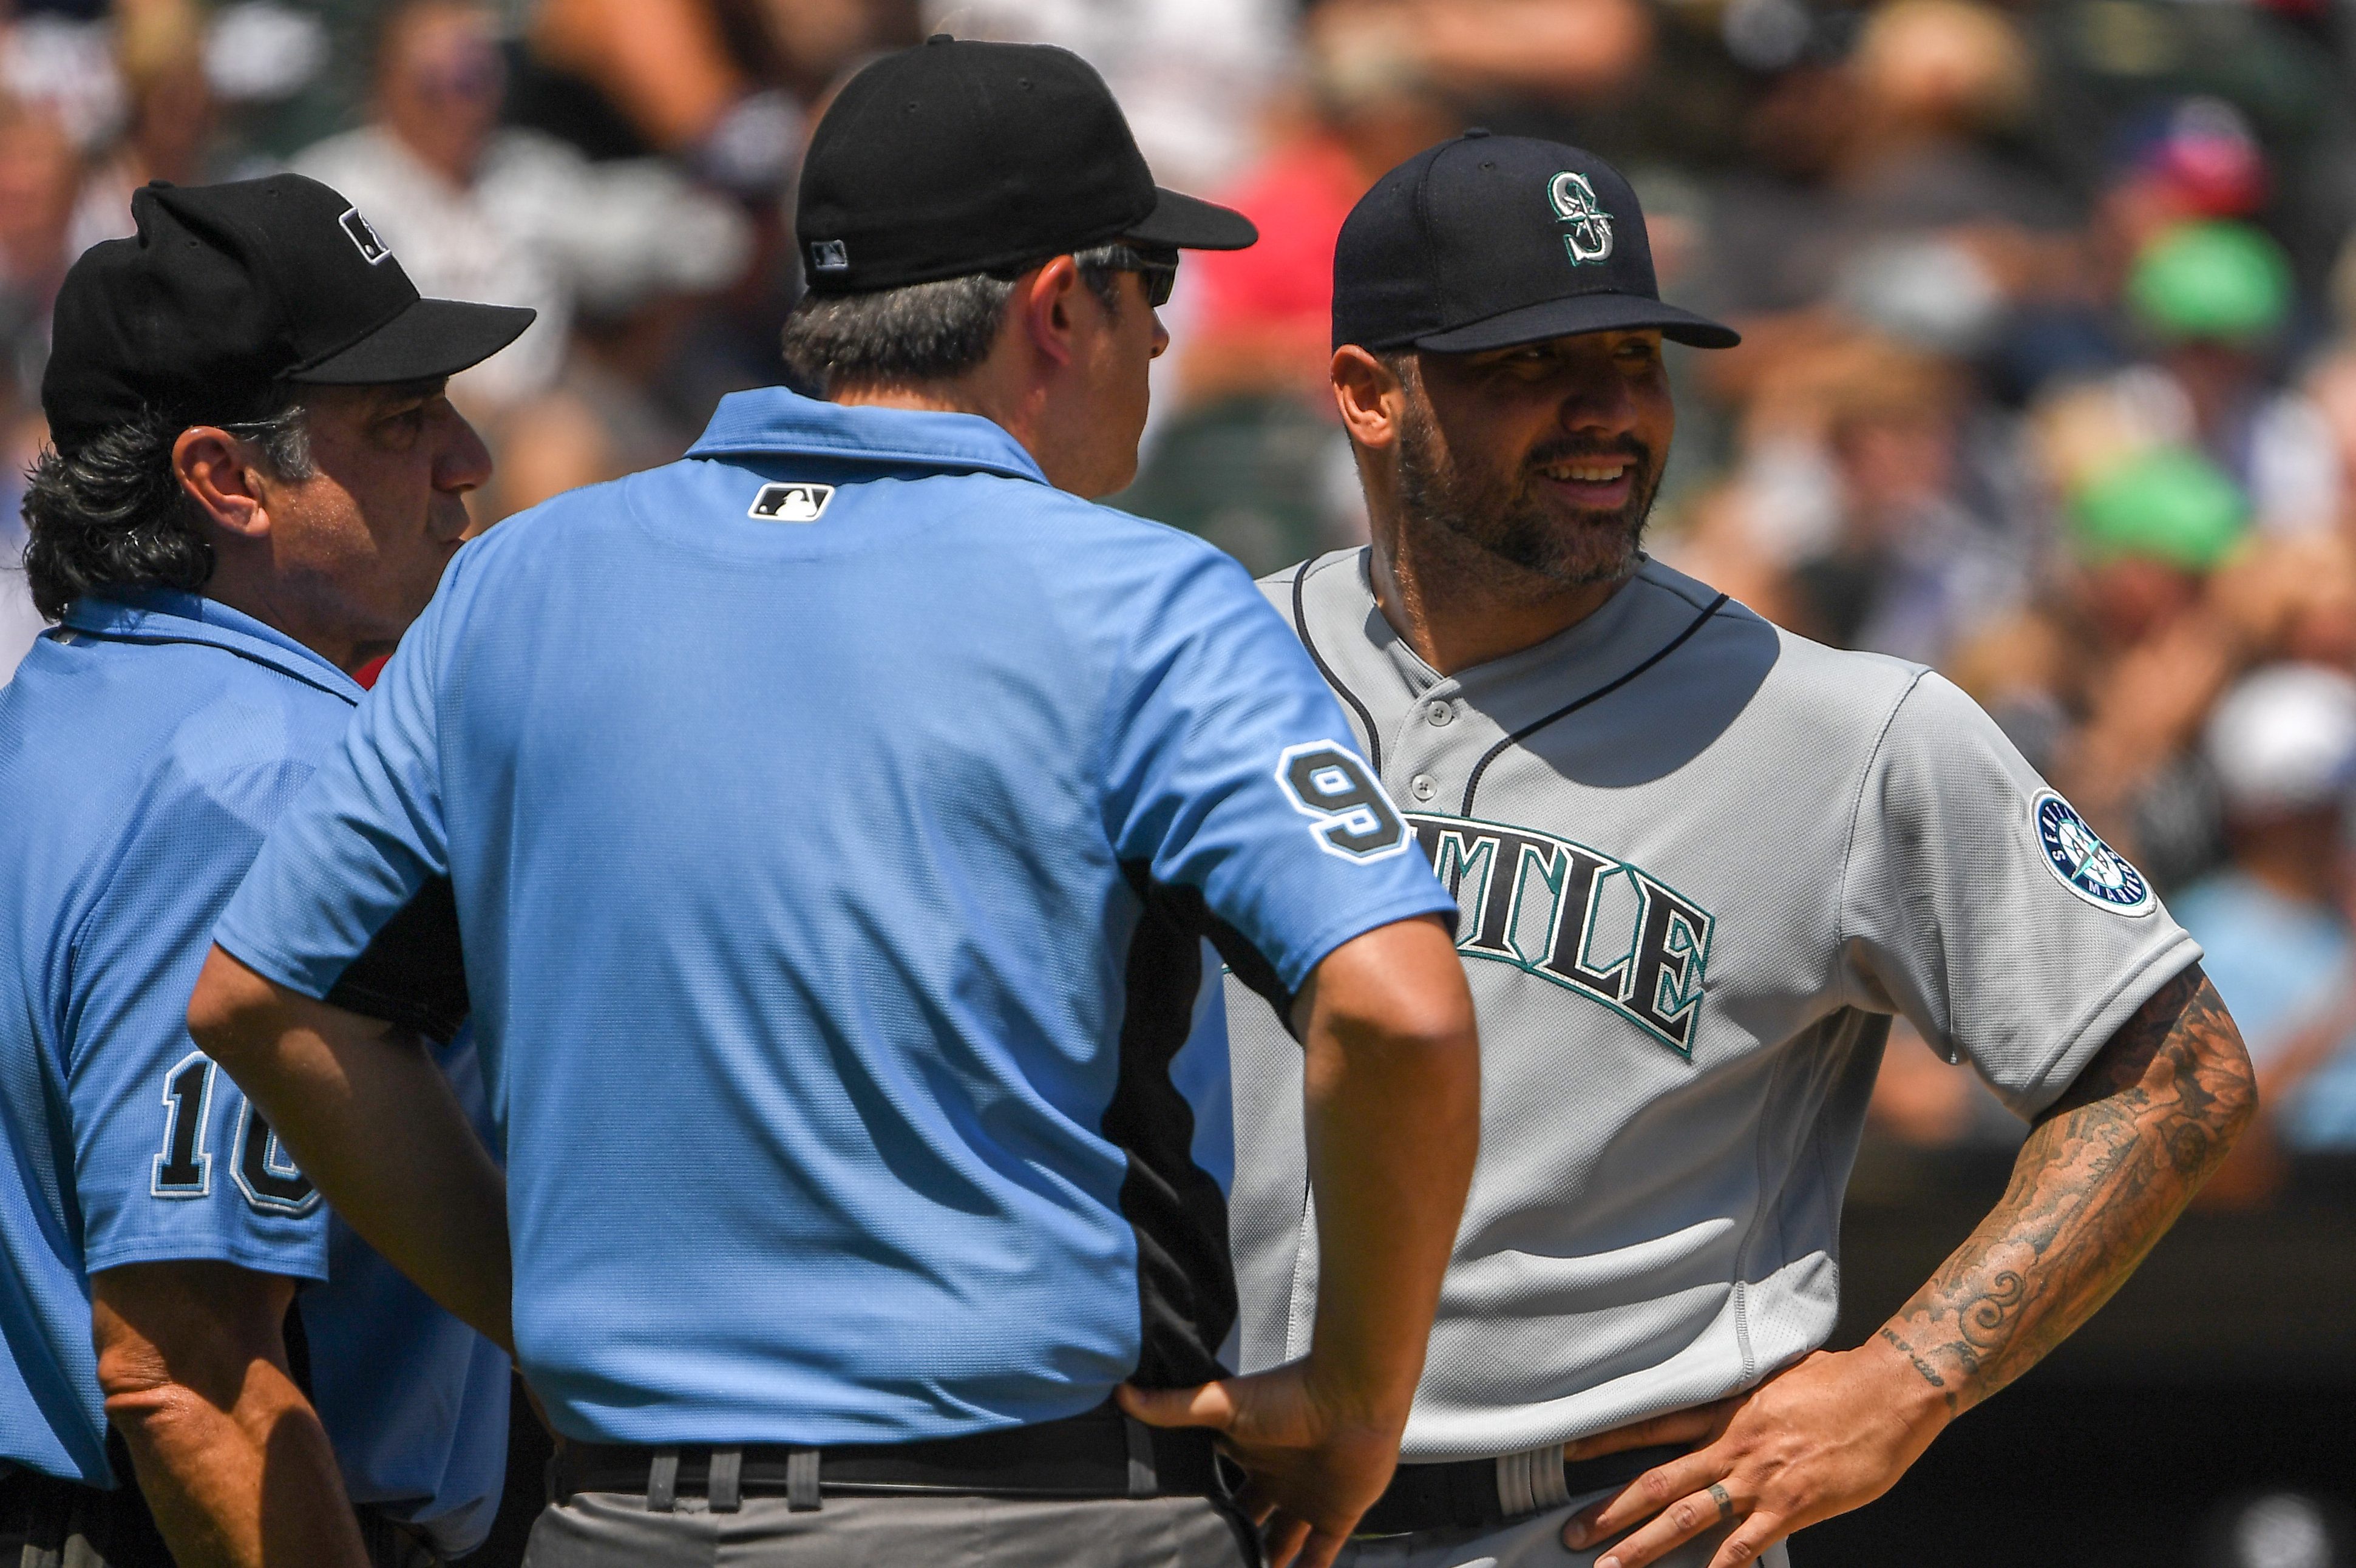 Umpires talk to Hector Santiago of the Seattle Mariners